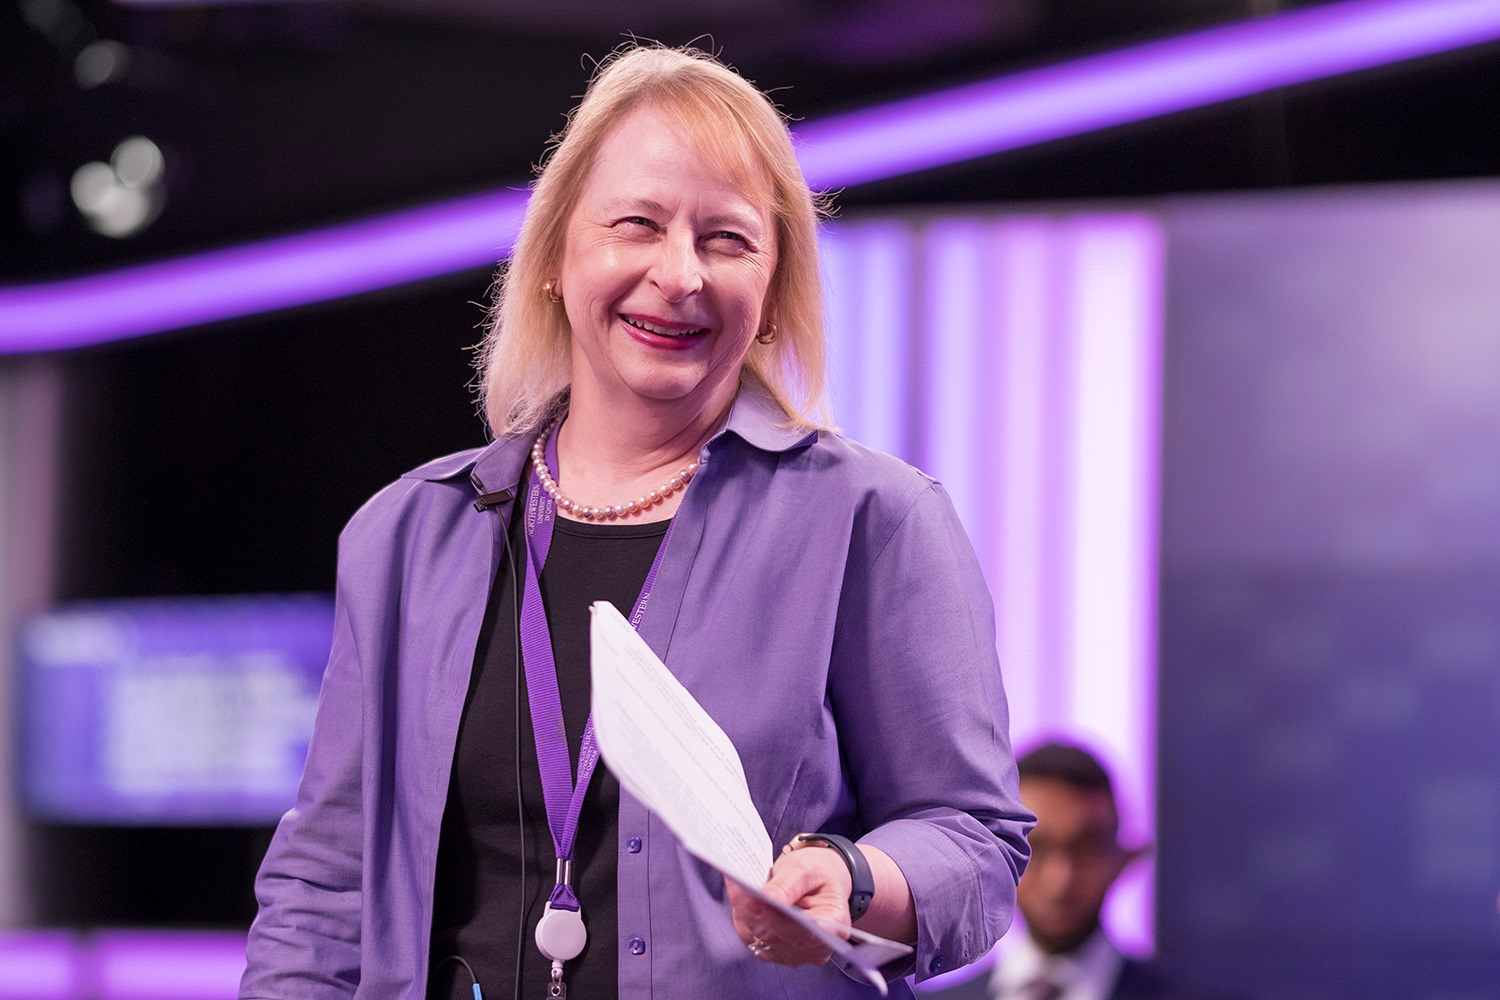 A double alumna, Dedinsky’s Northwestern story began in 1969 when she graduated with a degree in journalism, quickly followed a year later with a master’s, also in journalism from Medill.